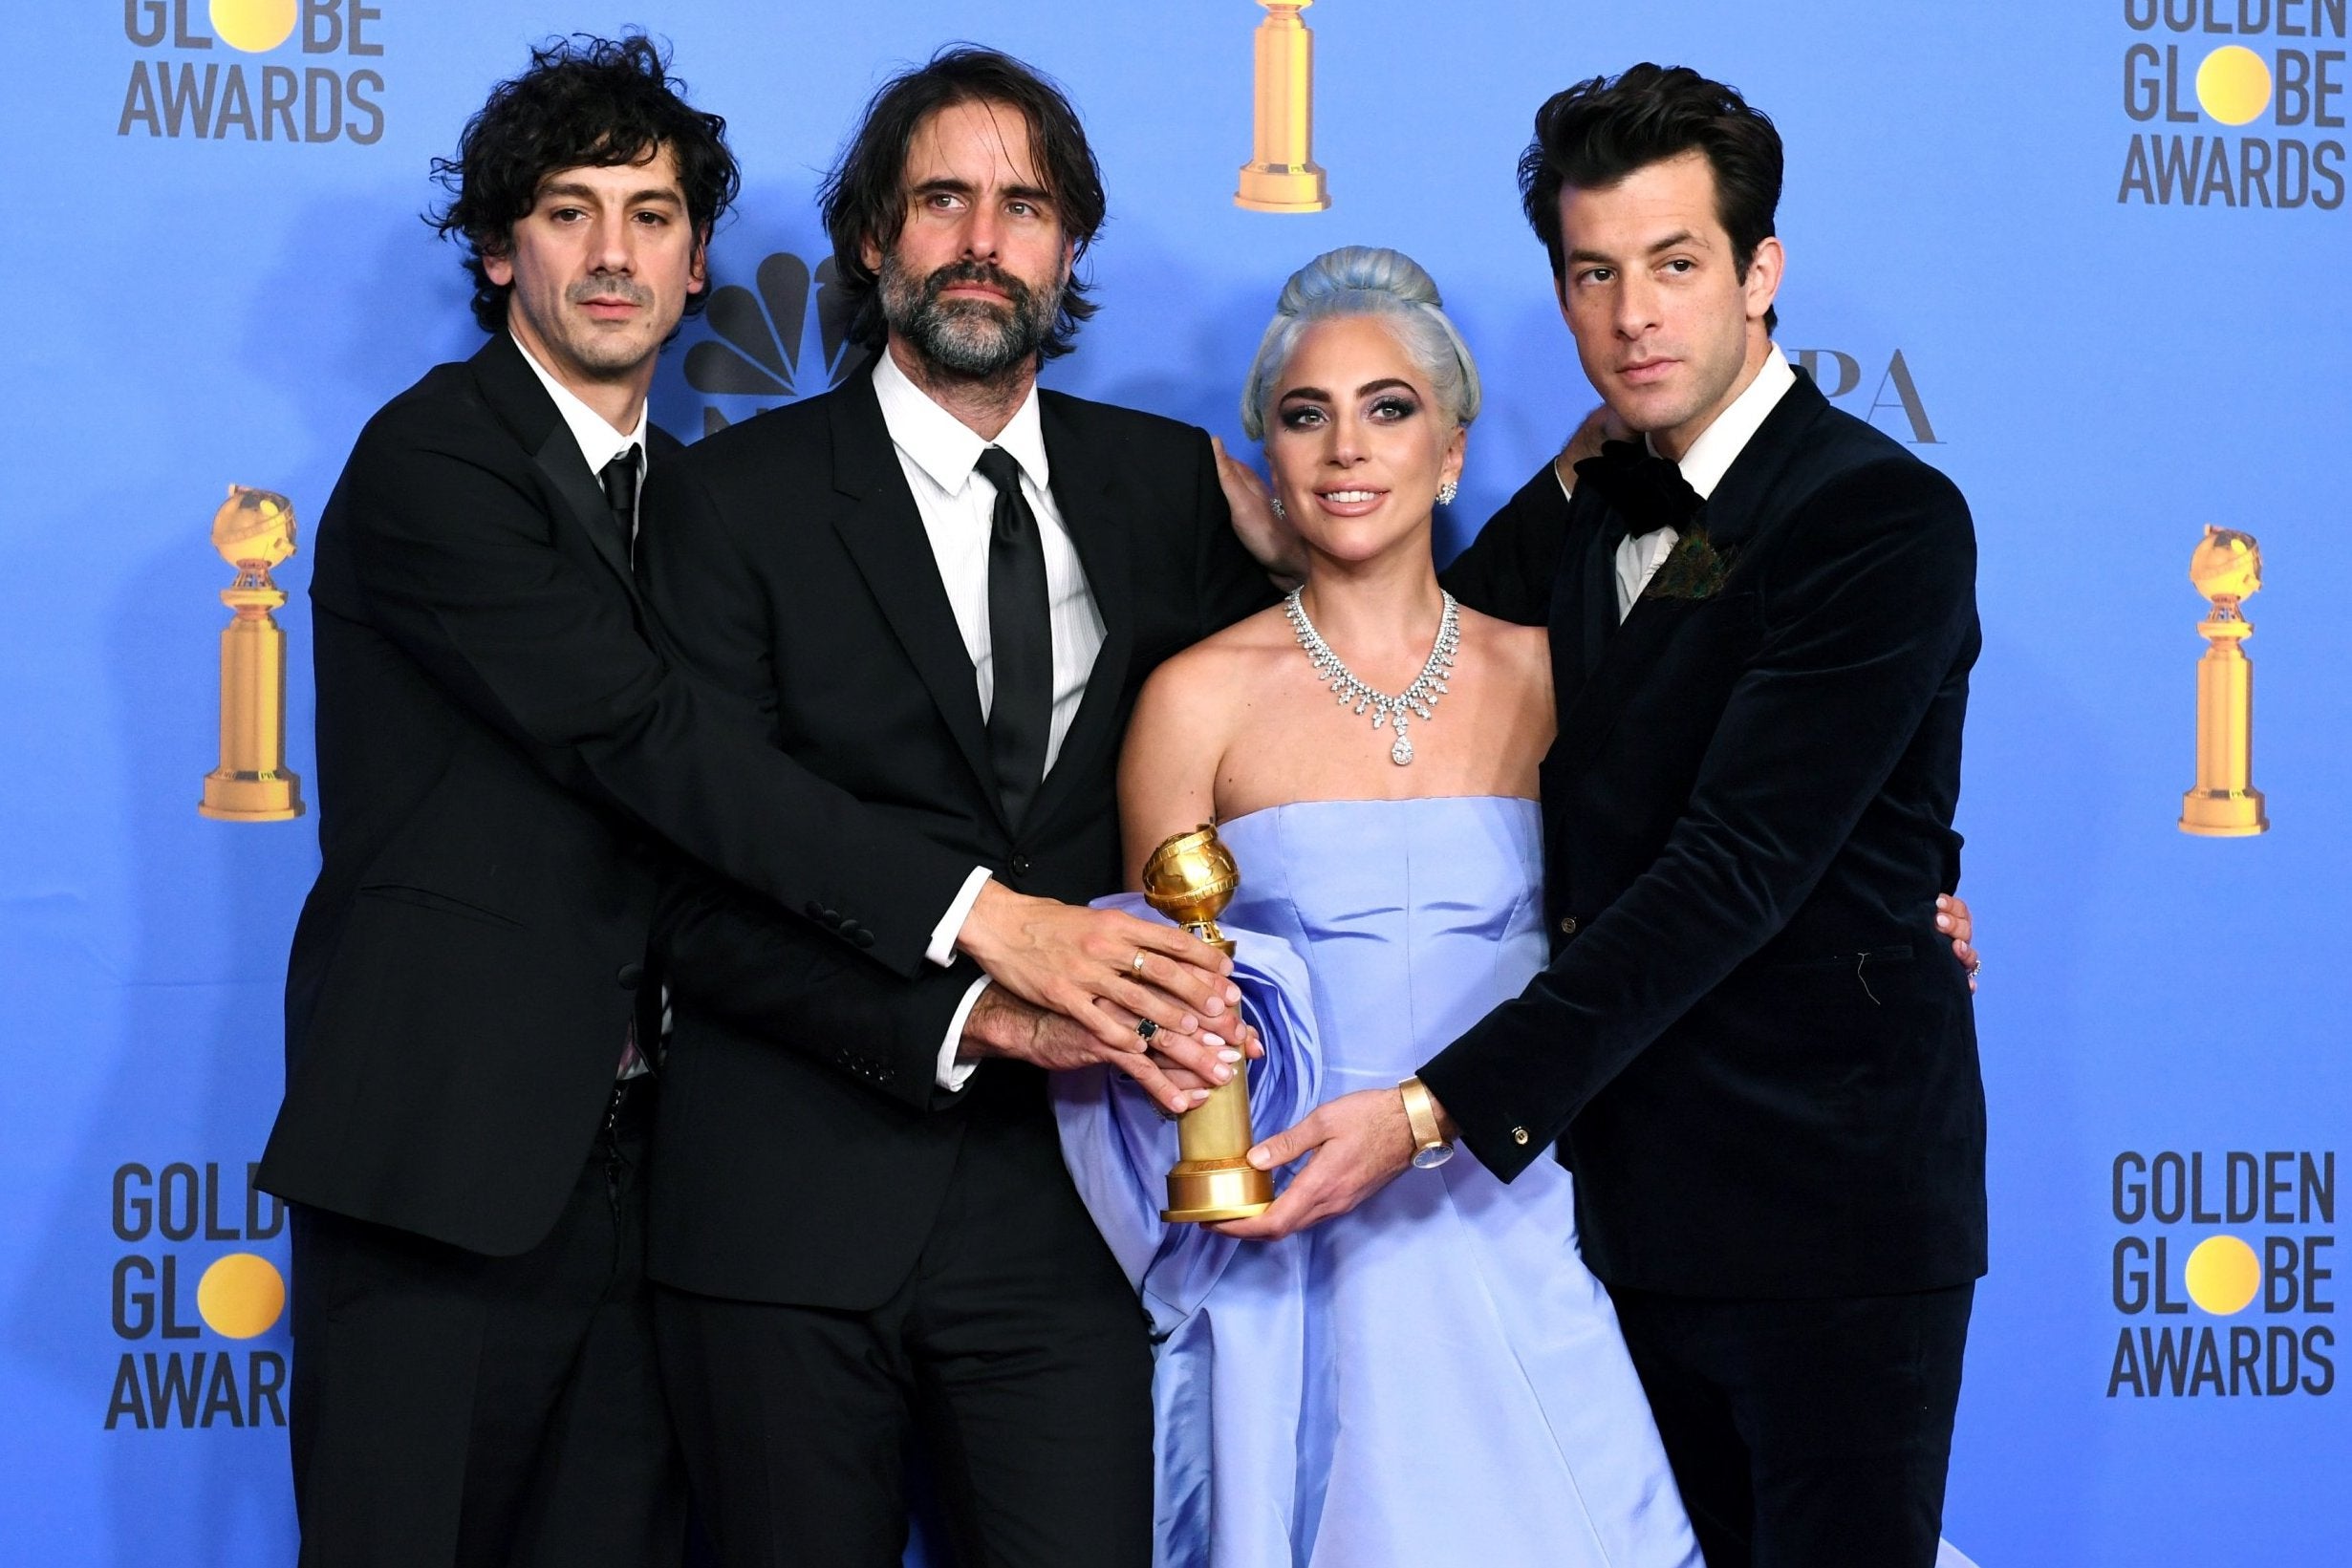 (l-r) Anthony Rossomando, Andrew Wyatt, Lady Gaga, and Mark Ronson backstage after accepting the award for Best Original Song - Motion Picture at the 2019 Golden Globes